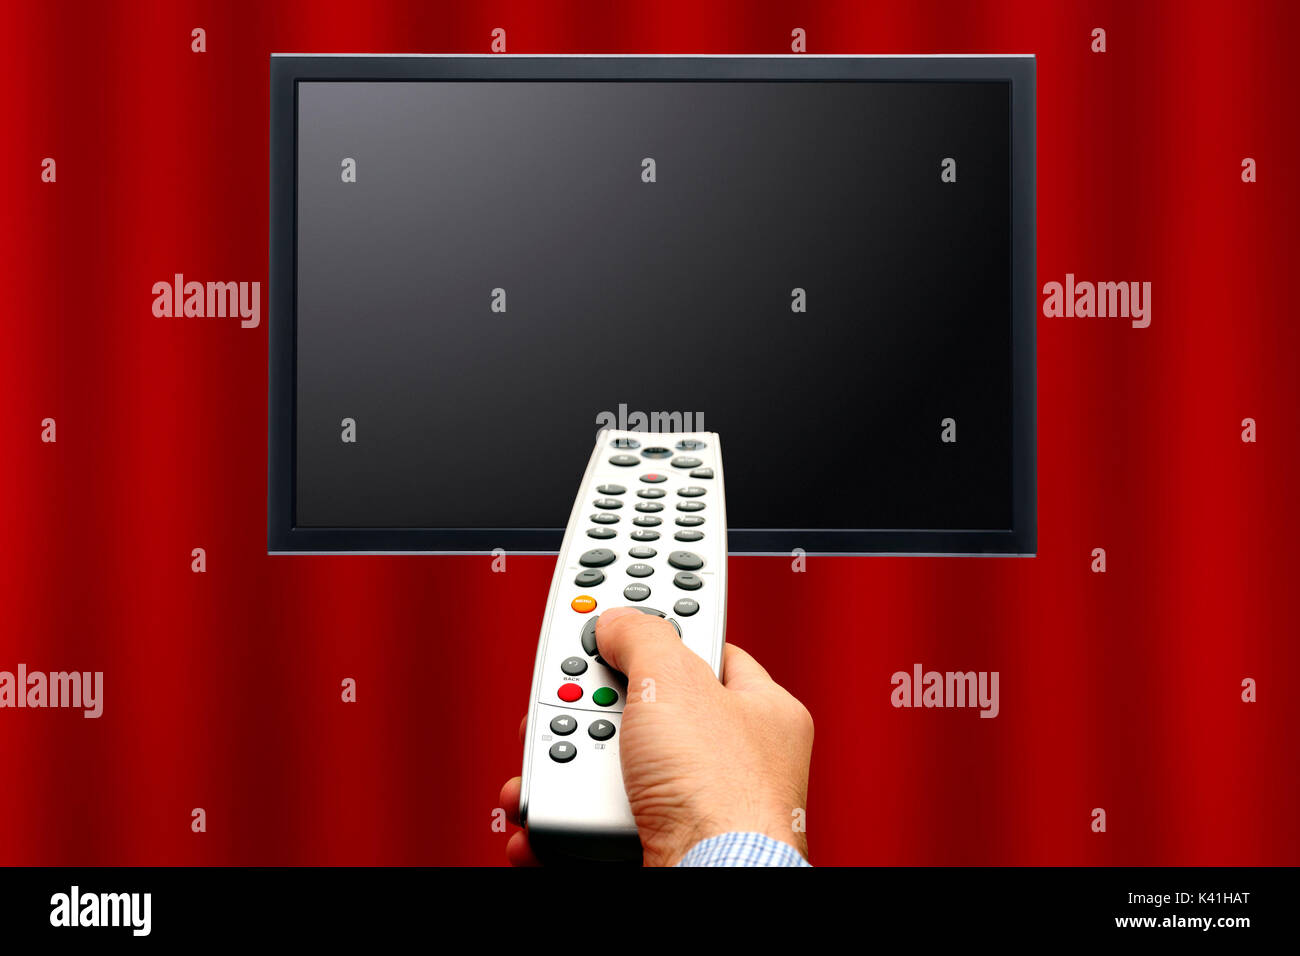 hand pointing a remote control toward a blank plasma television screen Stock Photo